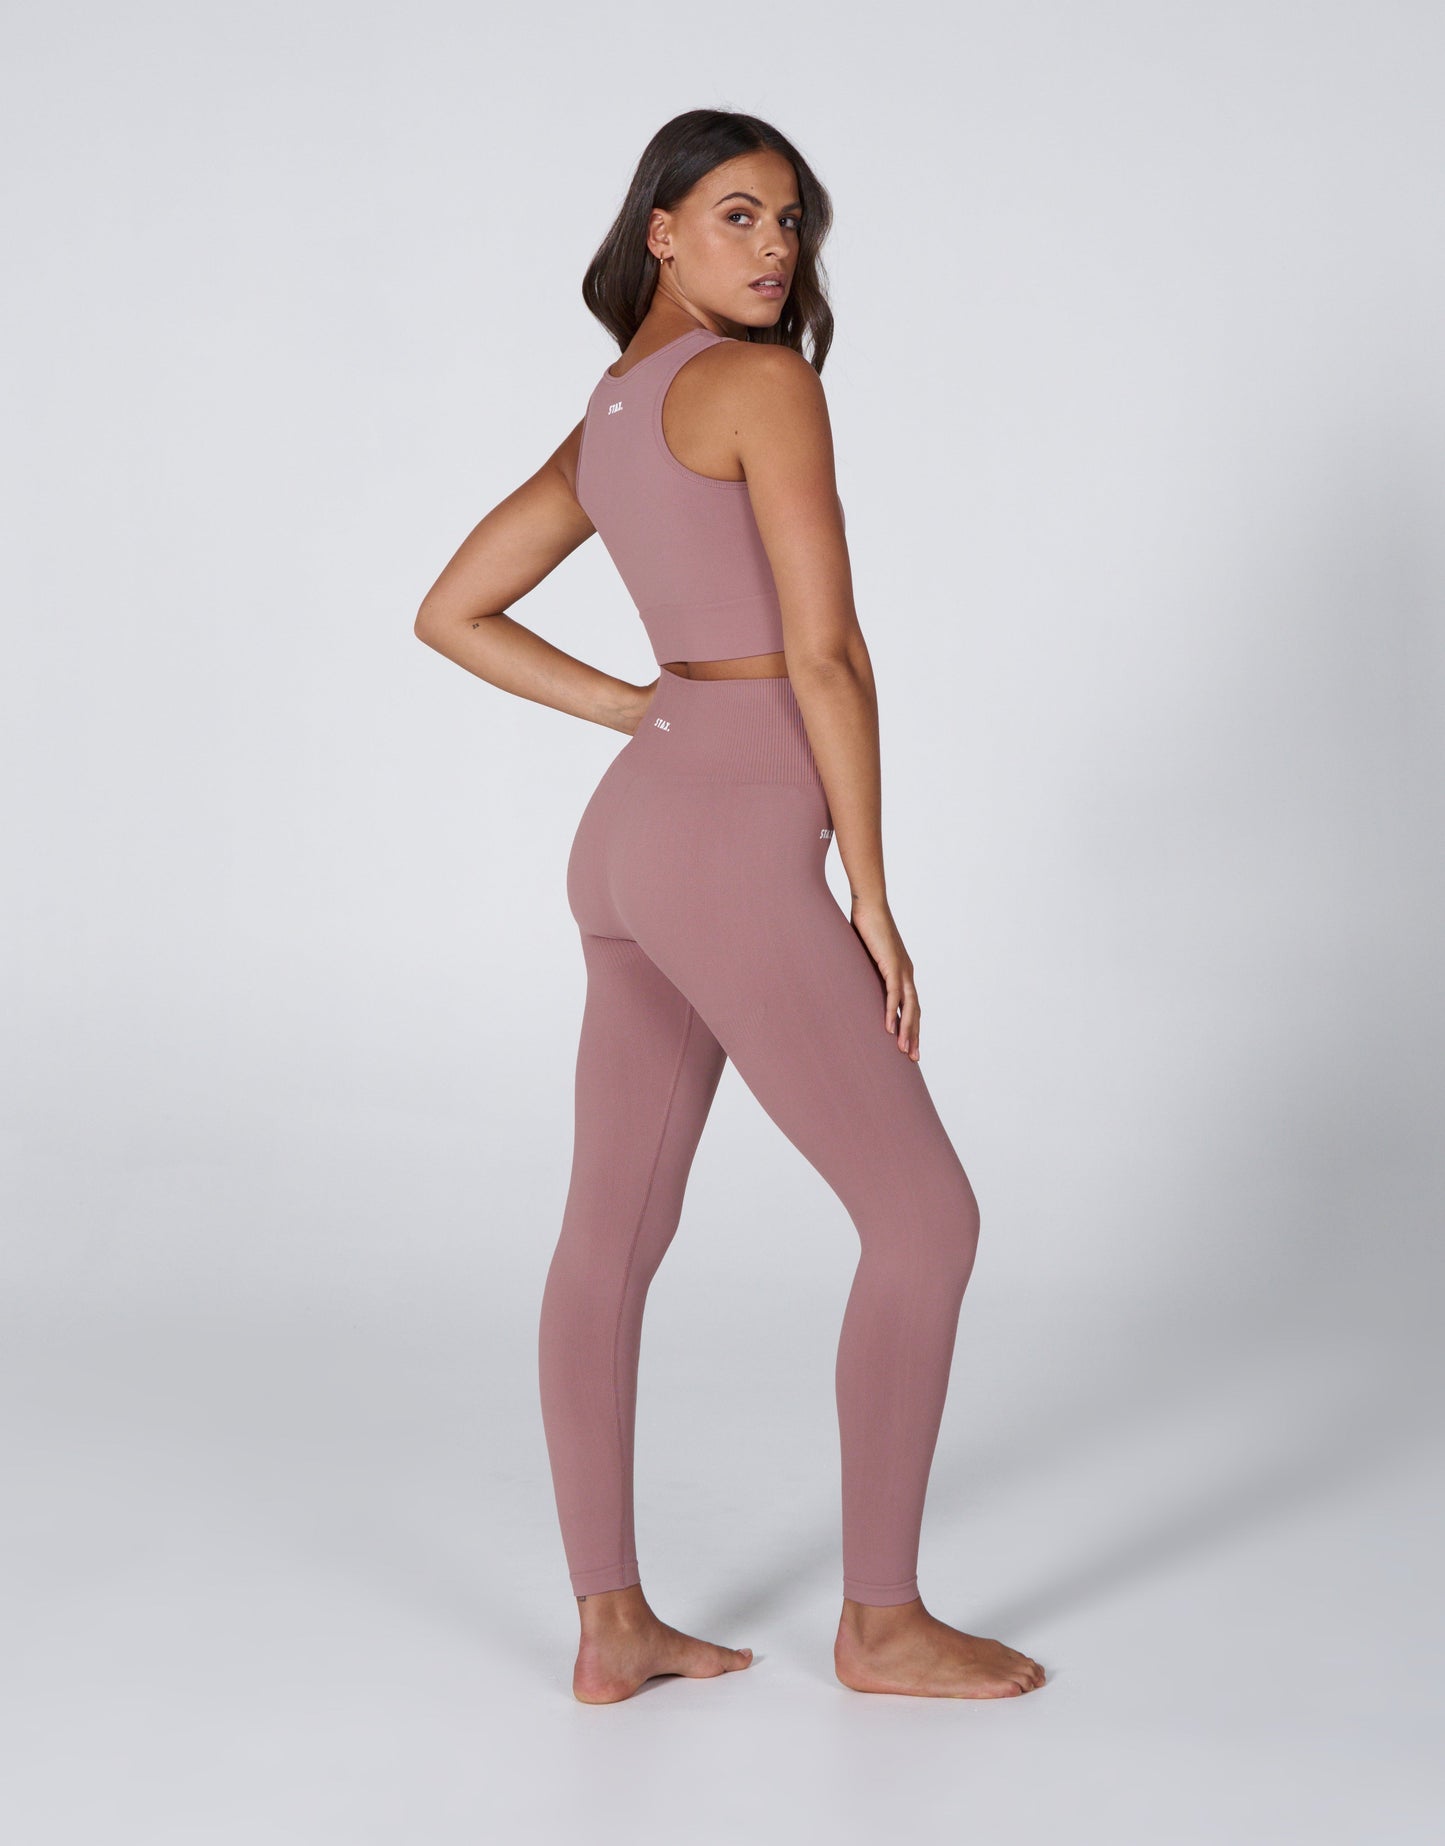 Premium Seamless Favourites Cropped Singlet - Dusty Rose